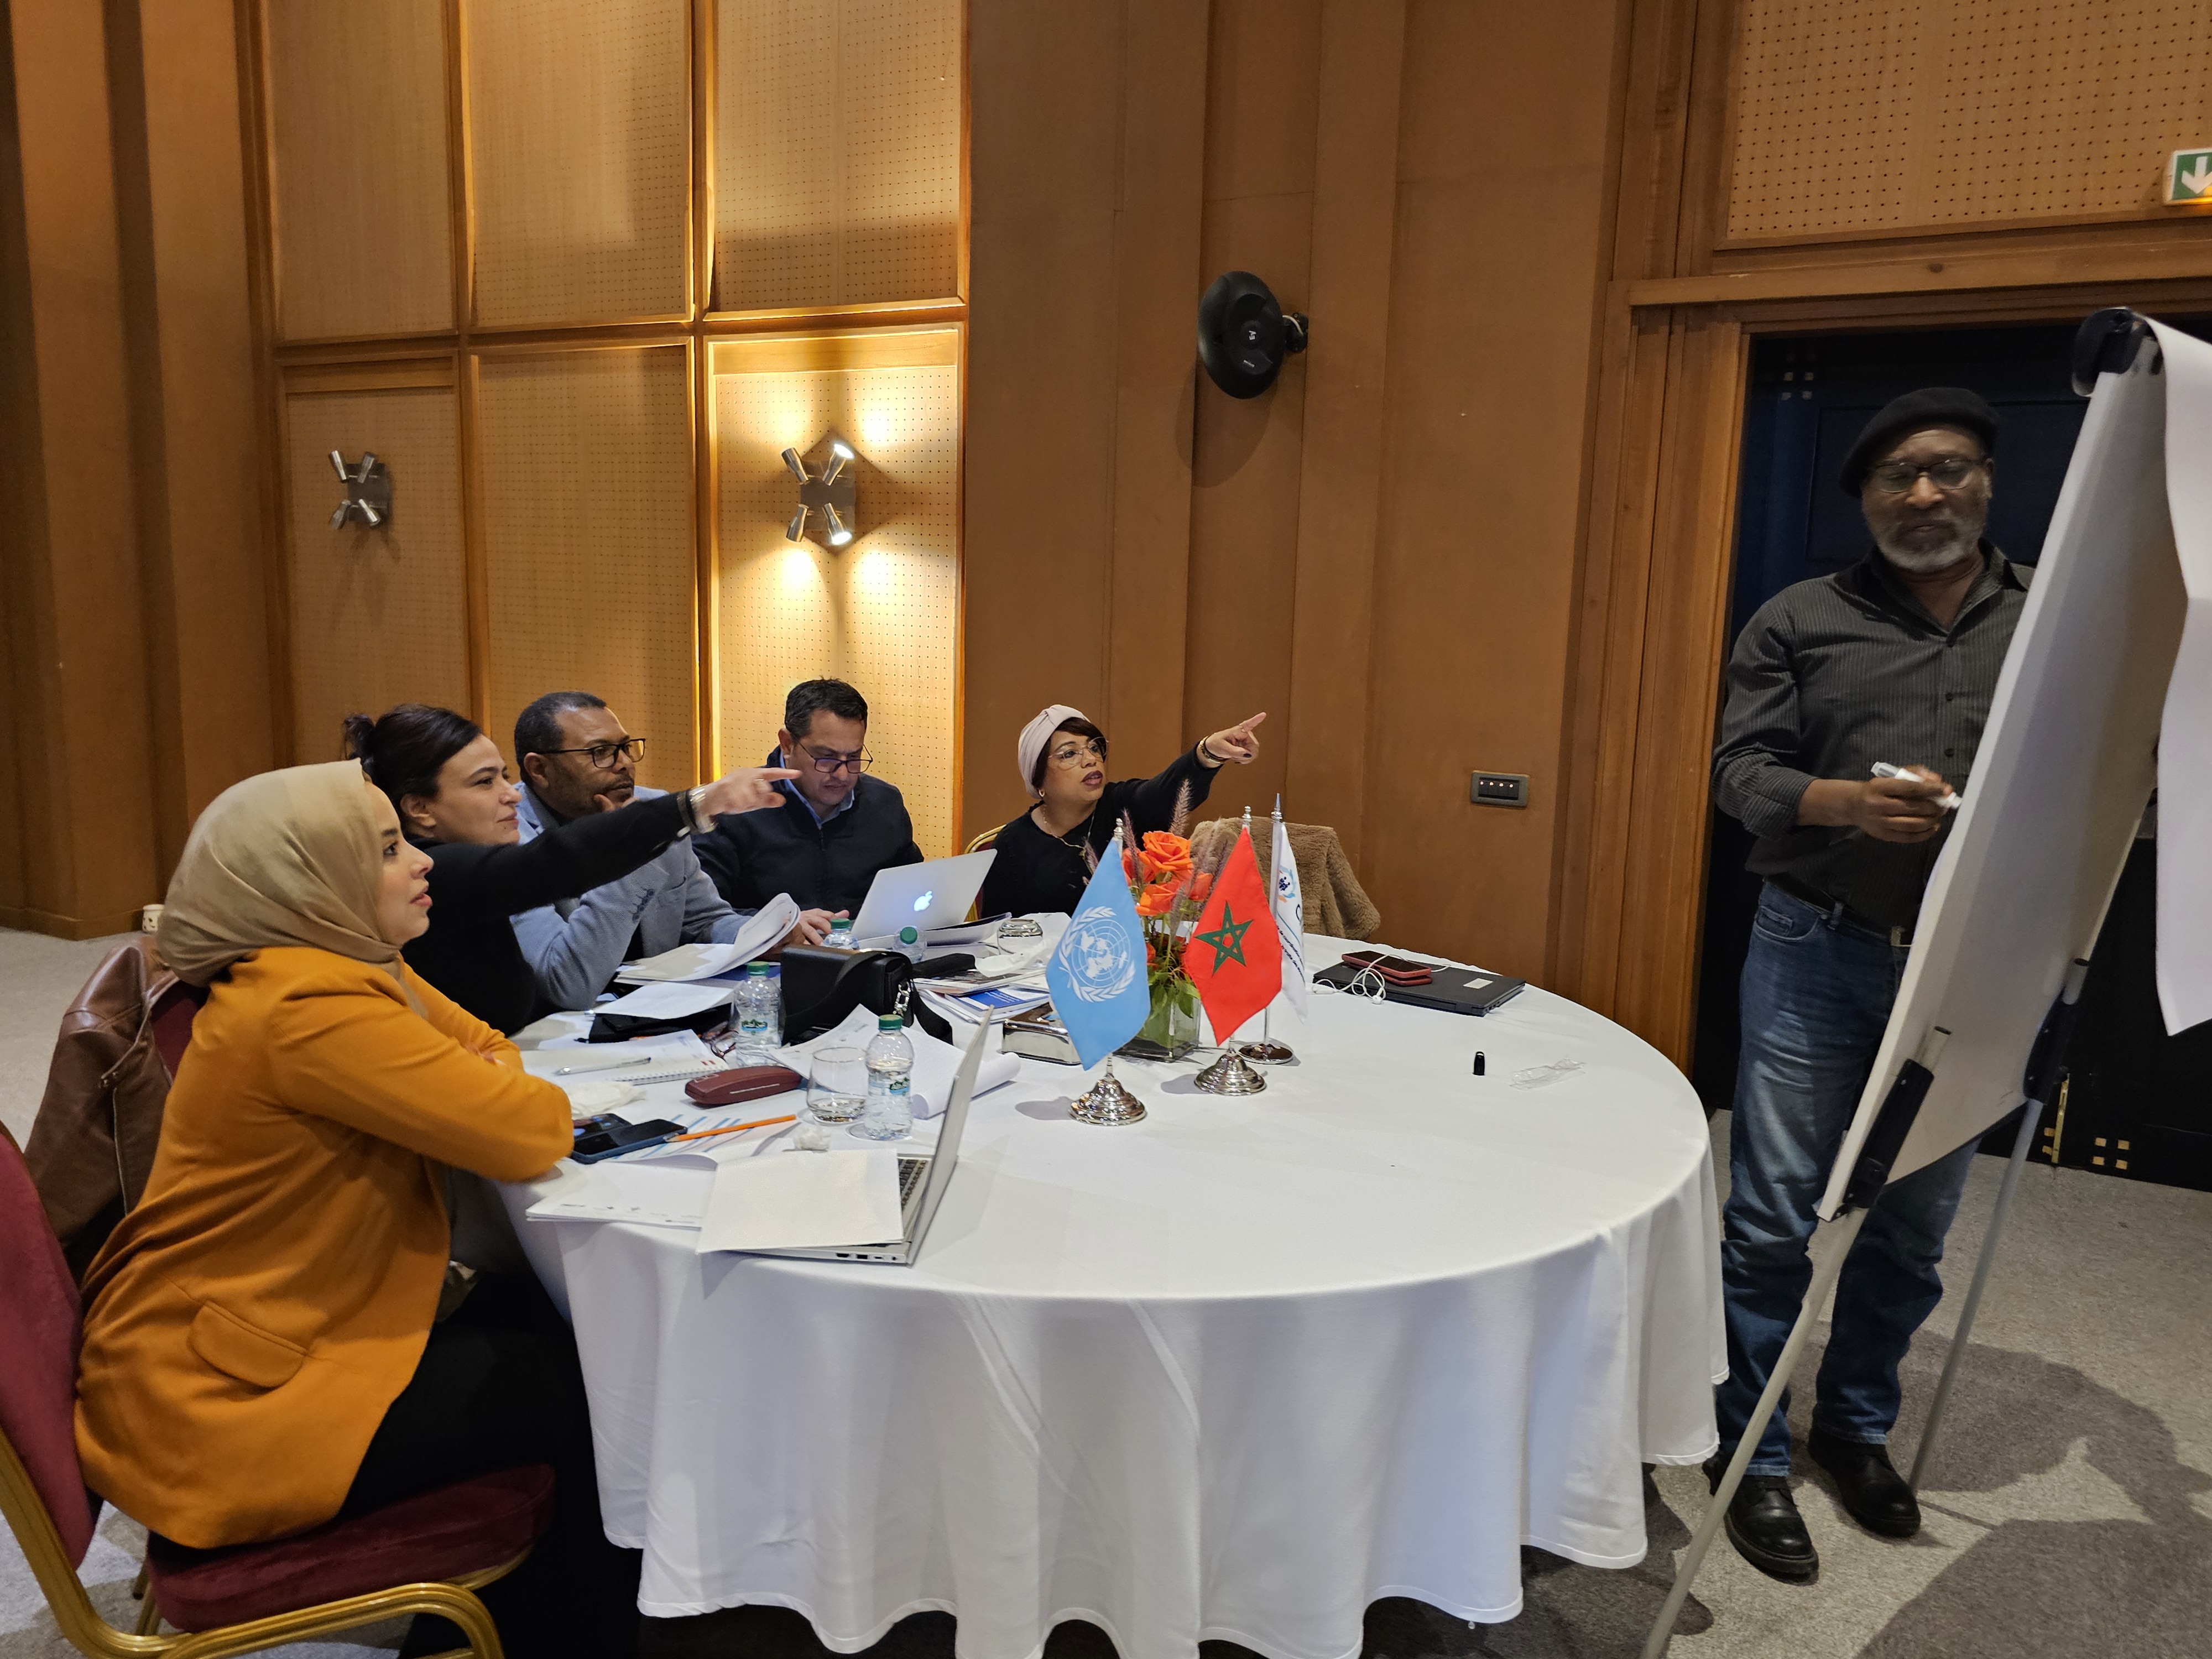 A beam of light in the dark: UNODC supports Moroccan journalists’ role in countering human trafficking and migrant smuggling